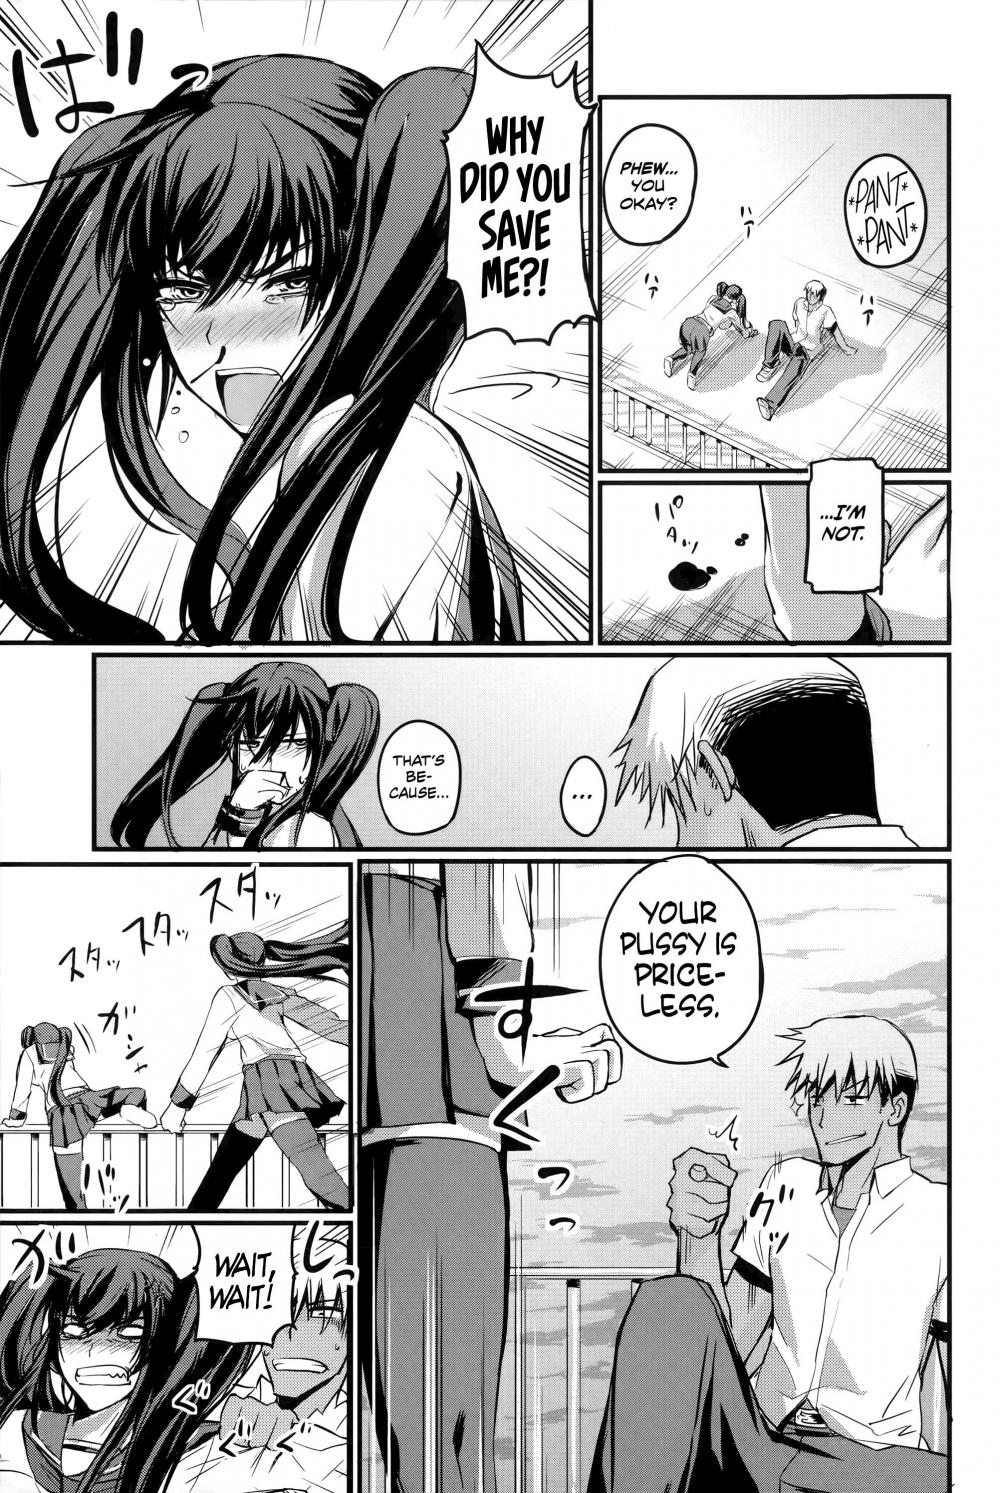 Hentai Manga Comic-How To Stop A Suicide-Read-3